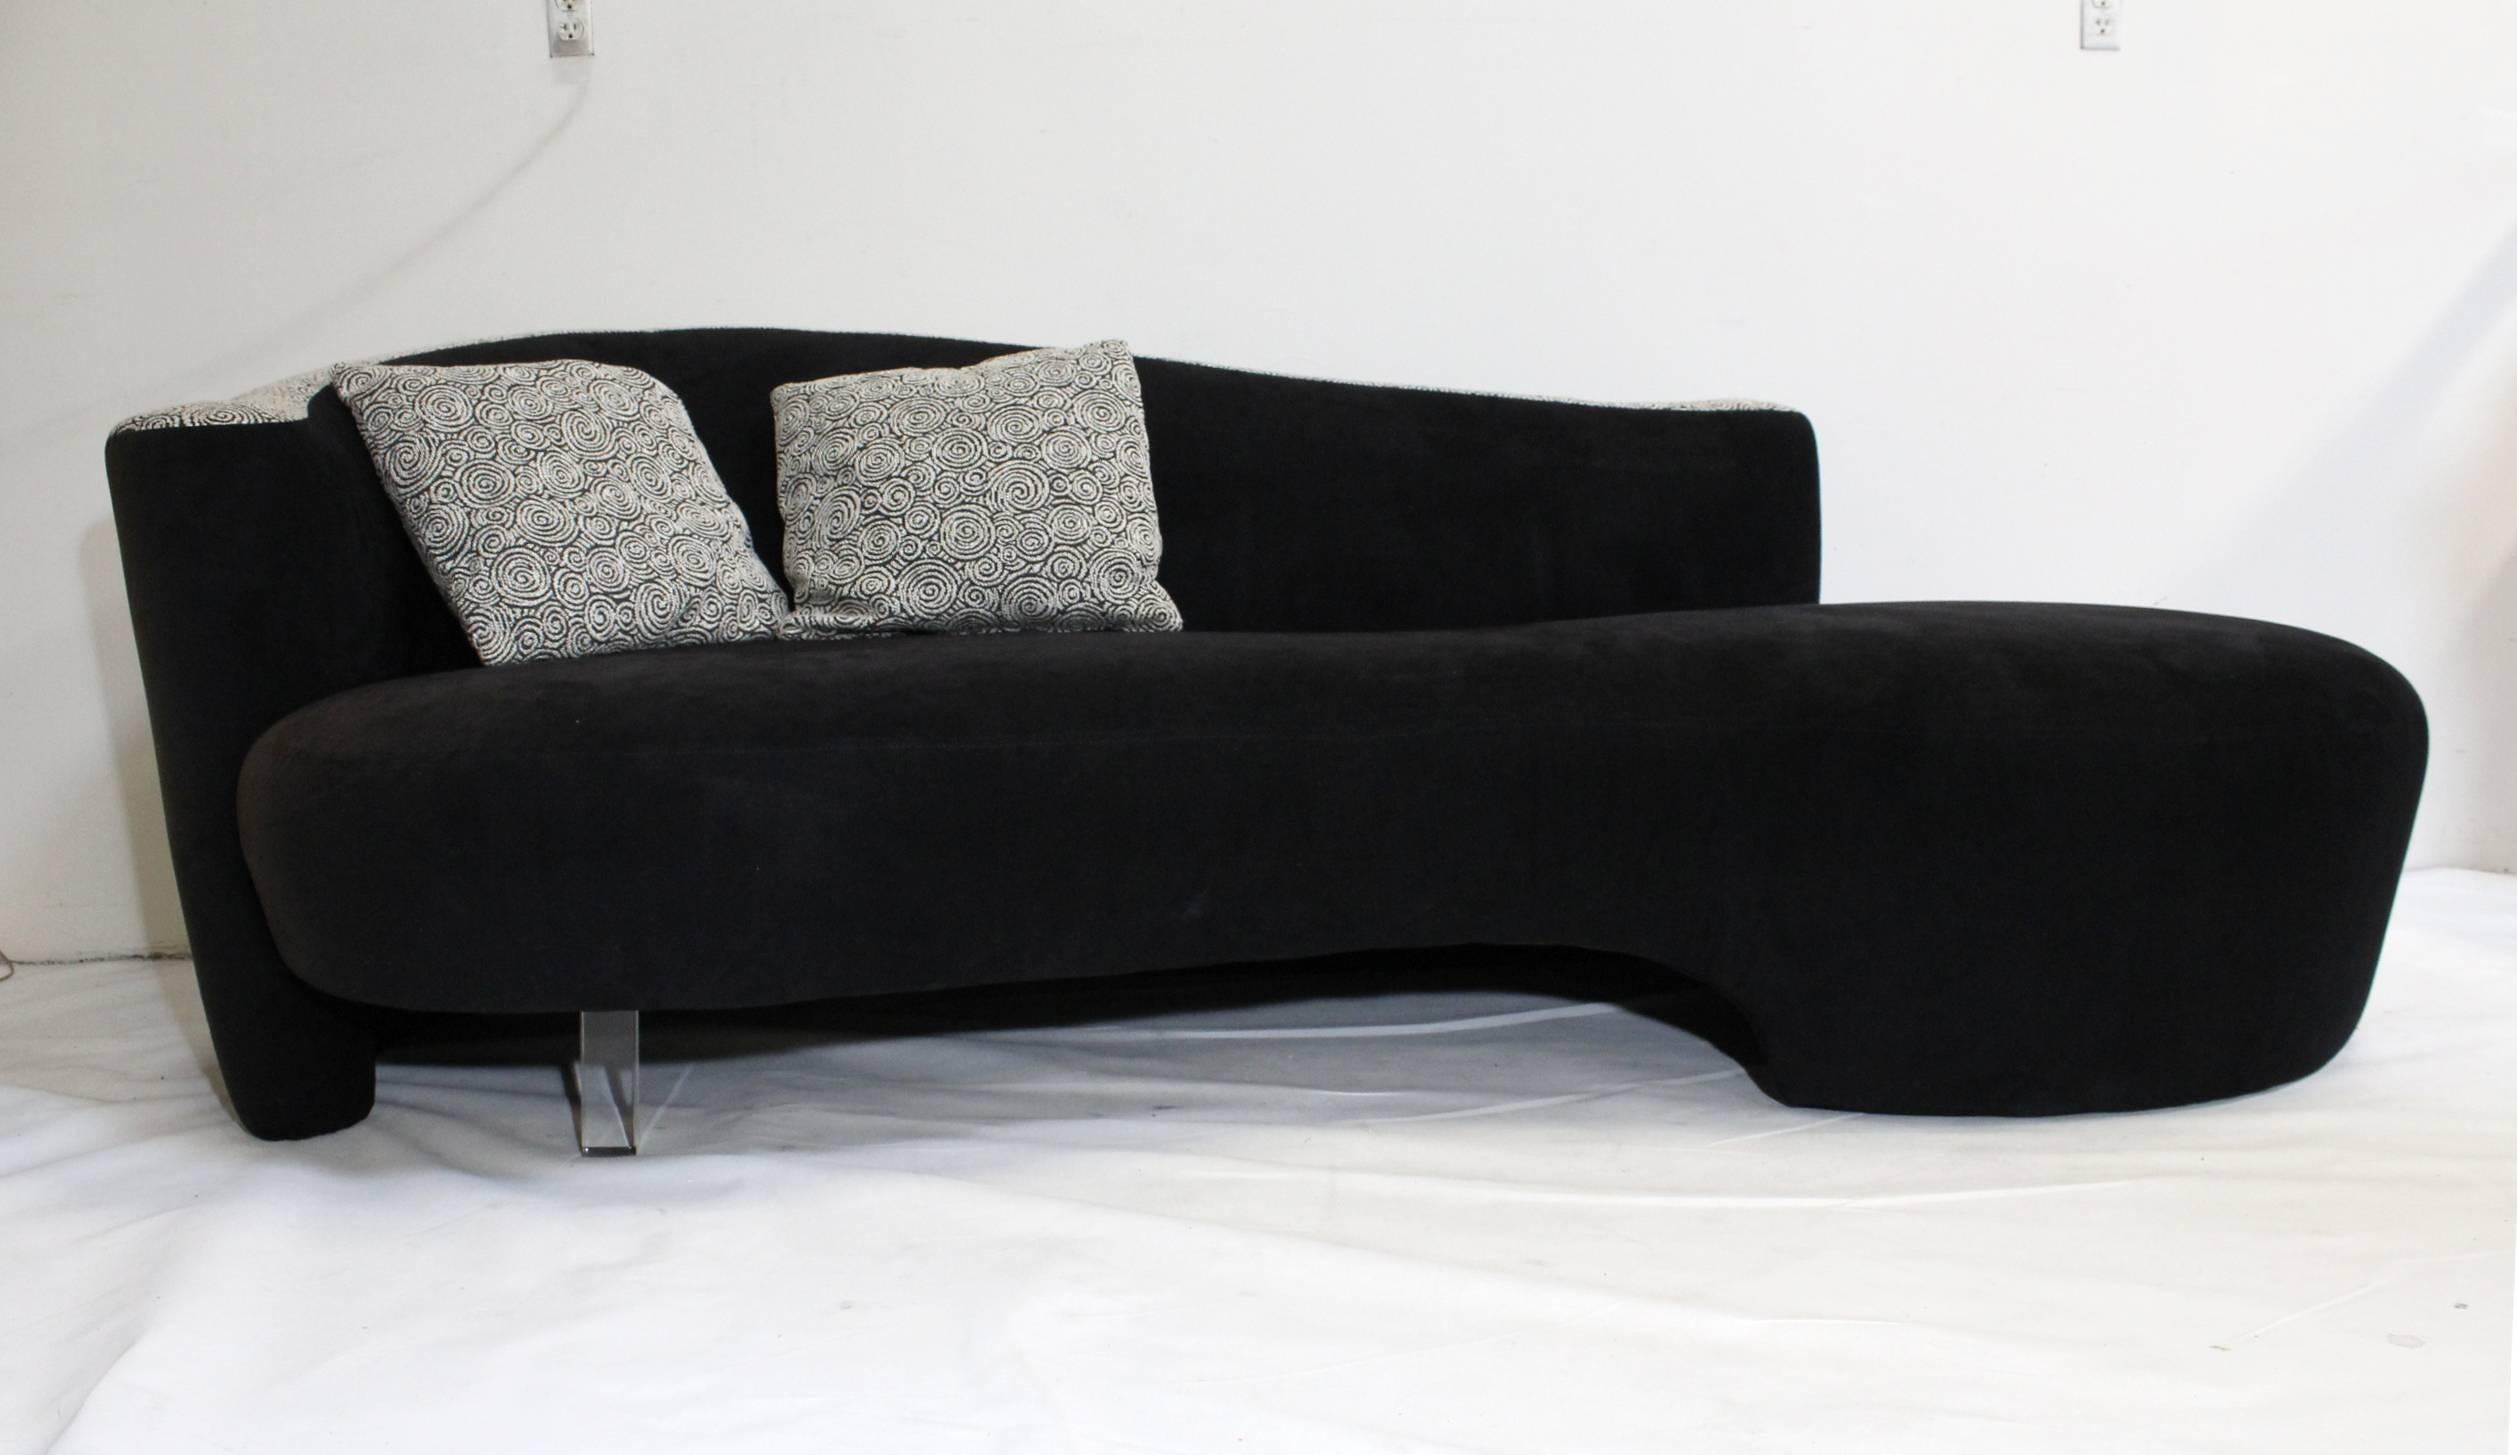 Beautiful pair of iconic style of Vladimir Kagan sofas for Weiman furniture. Sensual serpentine/cloud shape, raised on Lucite legs. Two-tone upholstery, woven gray on gray spiral pattern and black suede-like material.

Some sun fading on left side